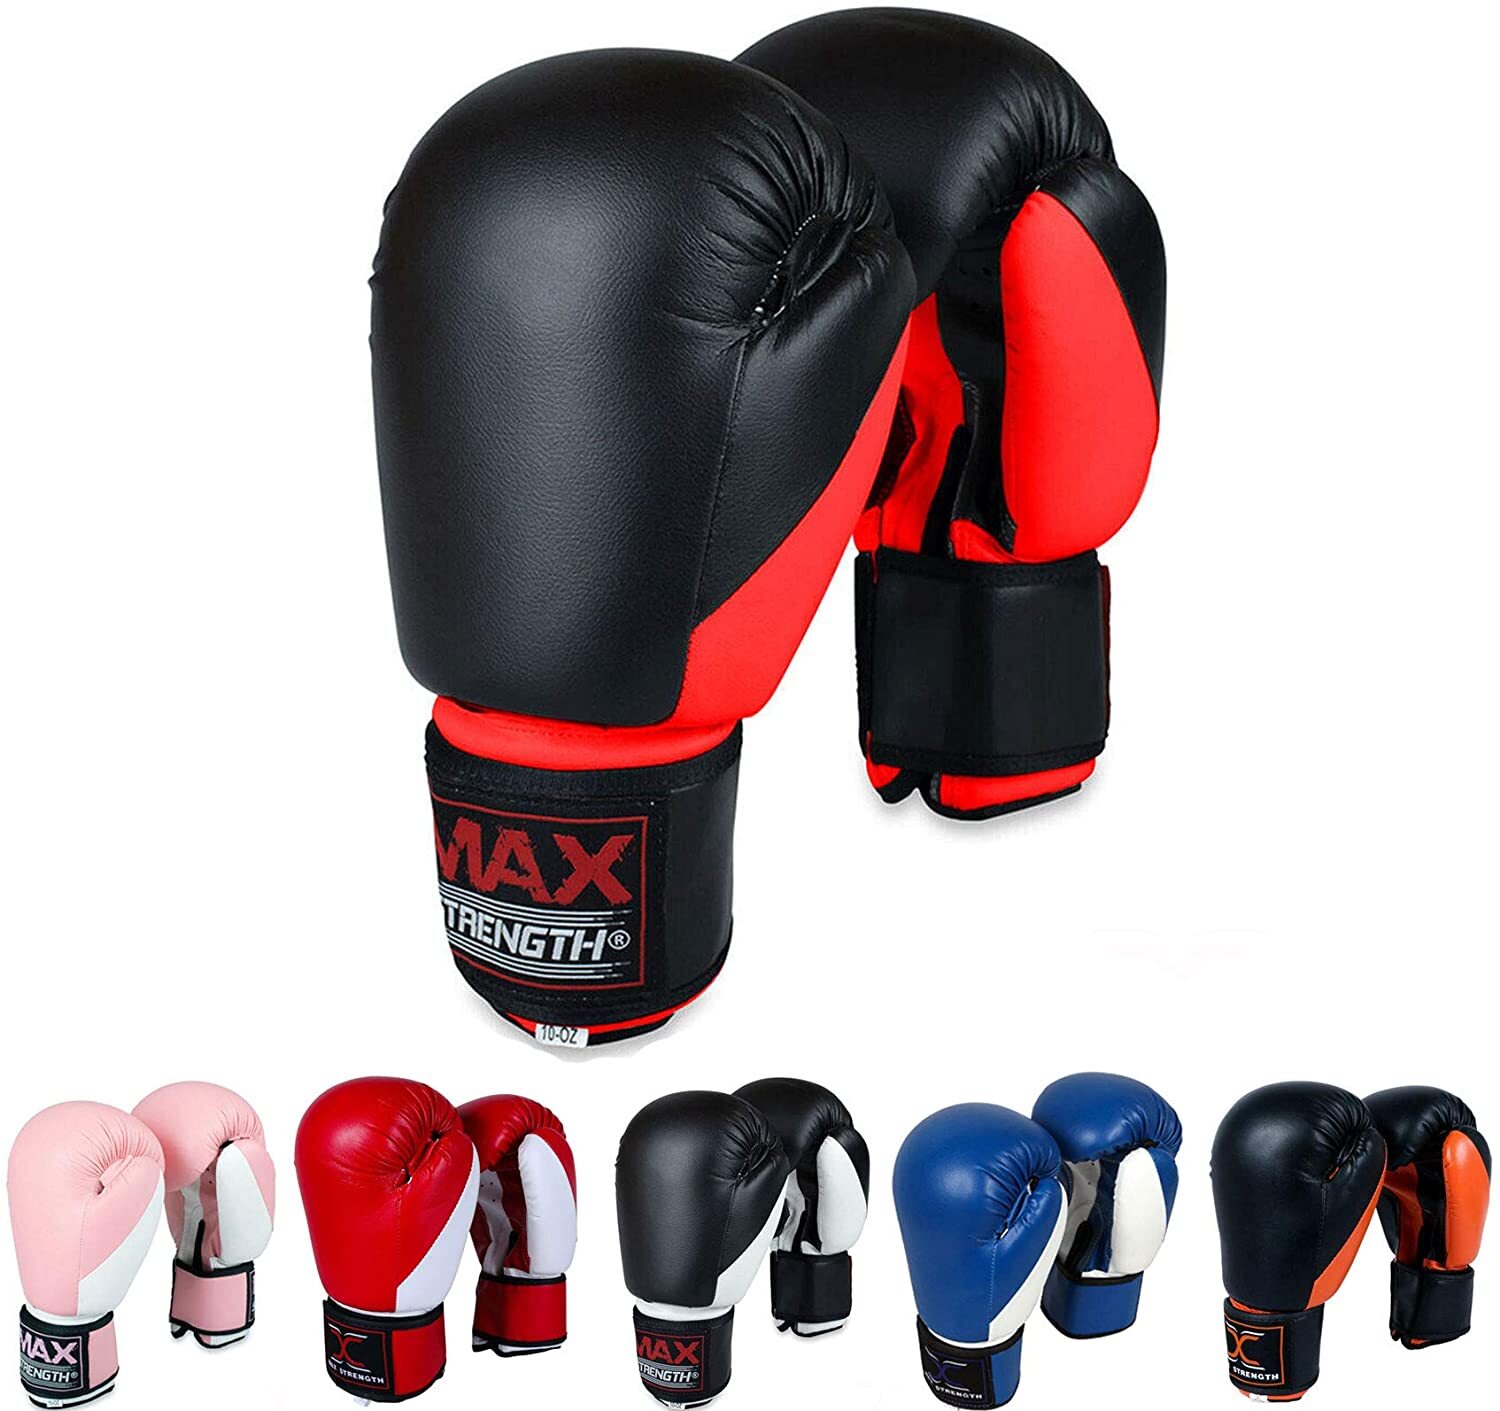 MMA Boxing Gloves Grappling Punching Bag Training Kickboxing Fight Sparring 